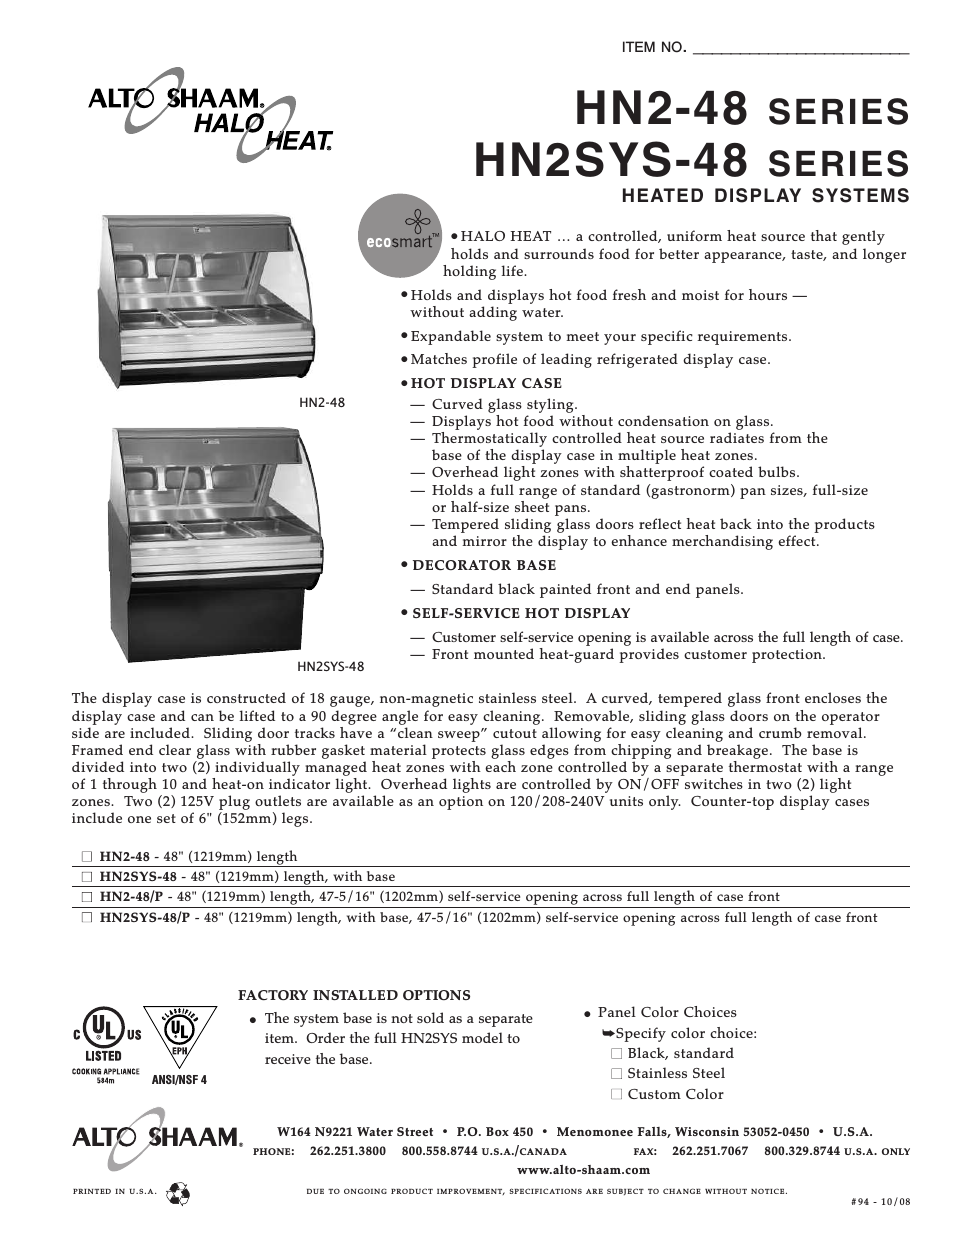 Heated Display Systems HN2SYS-48/P